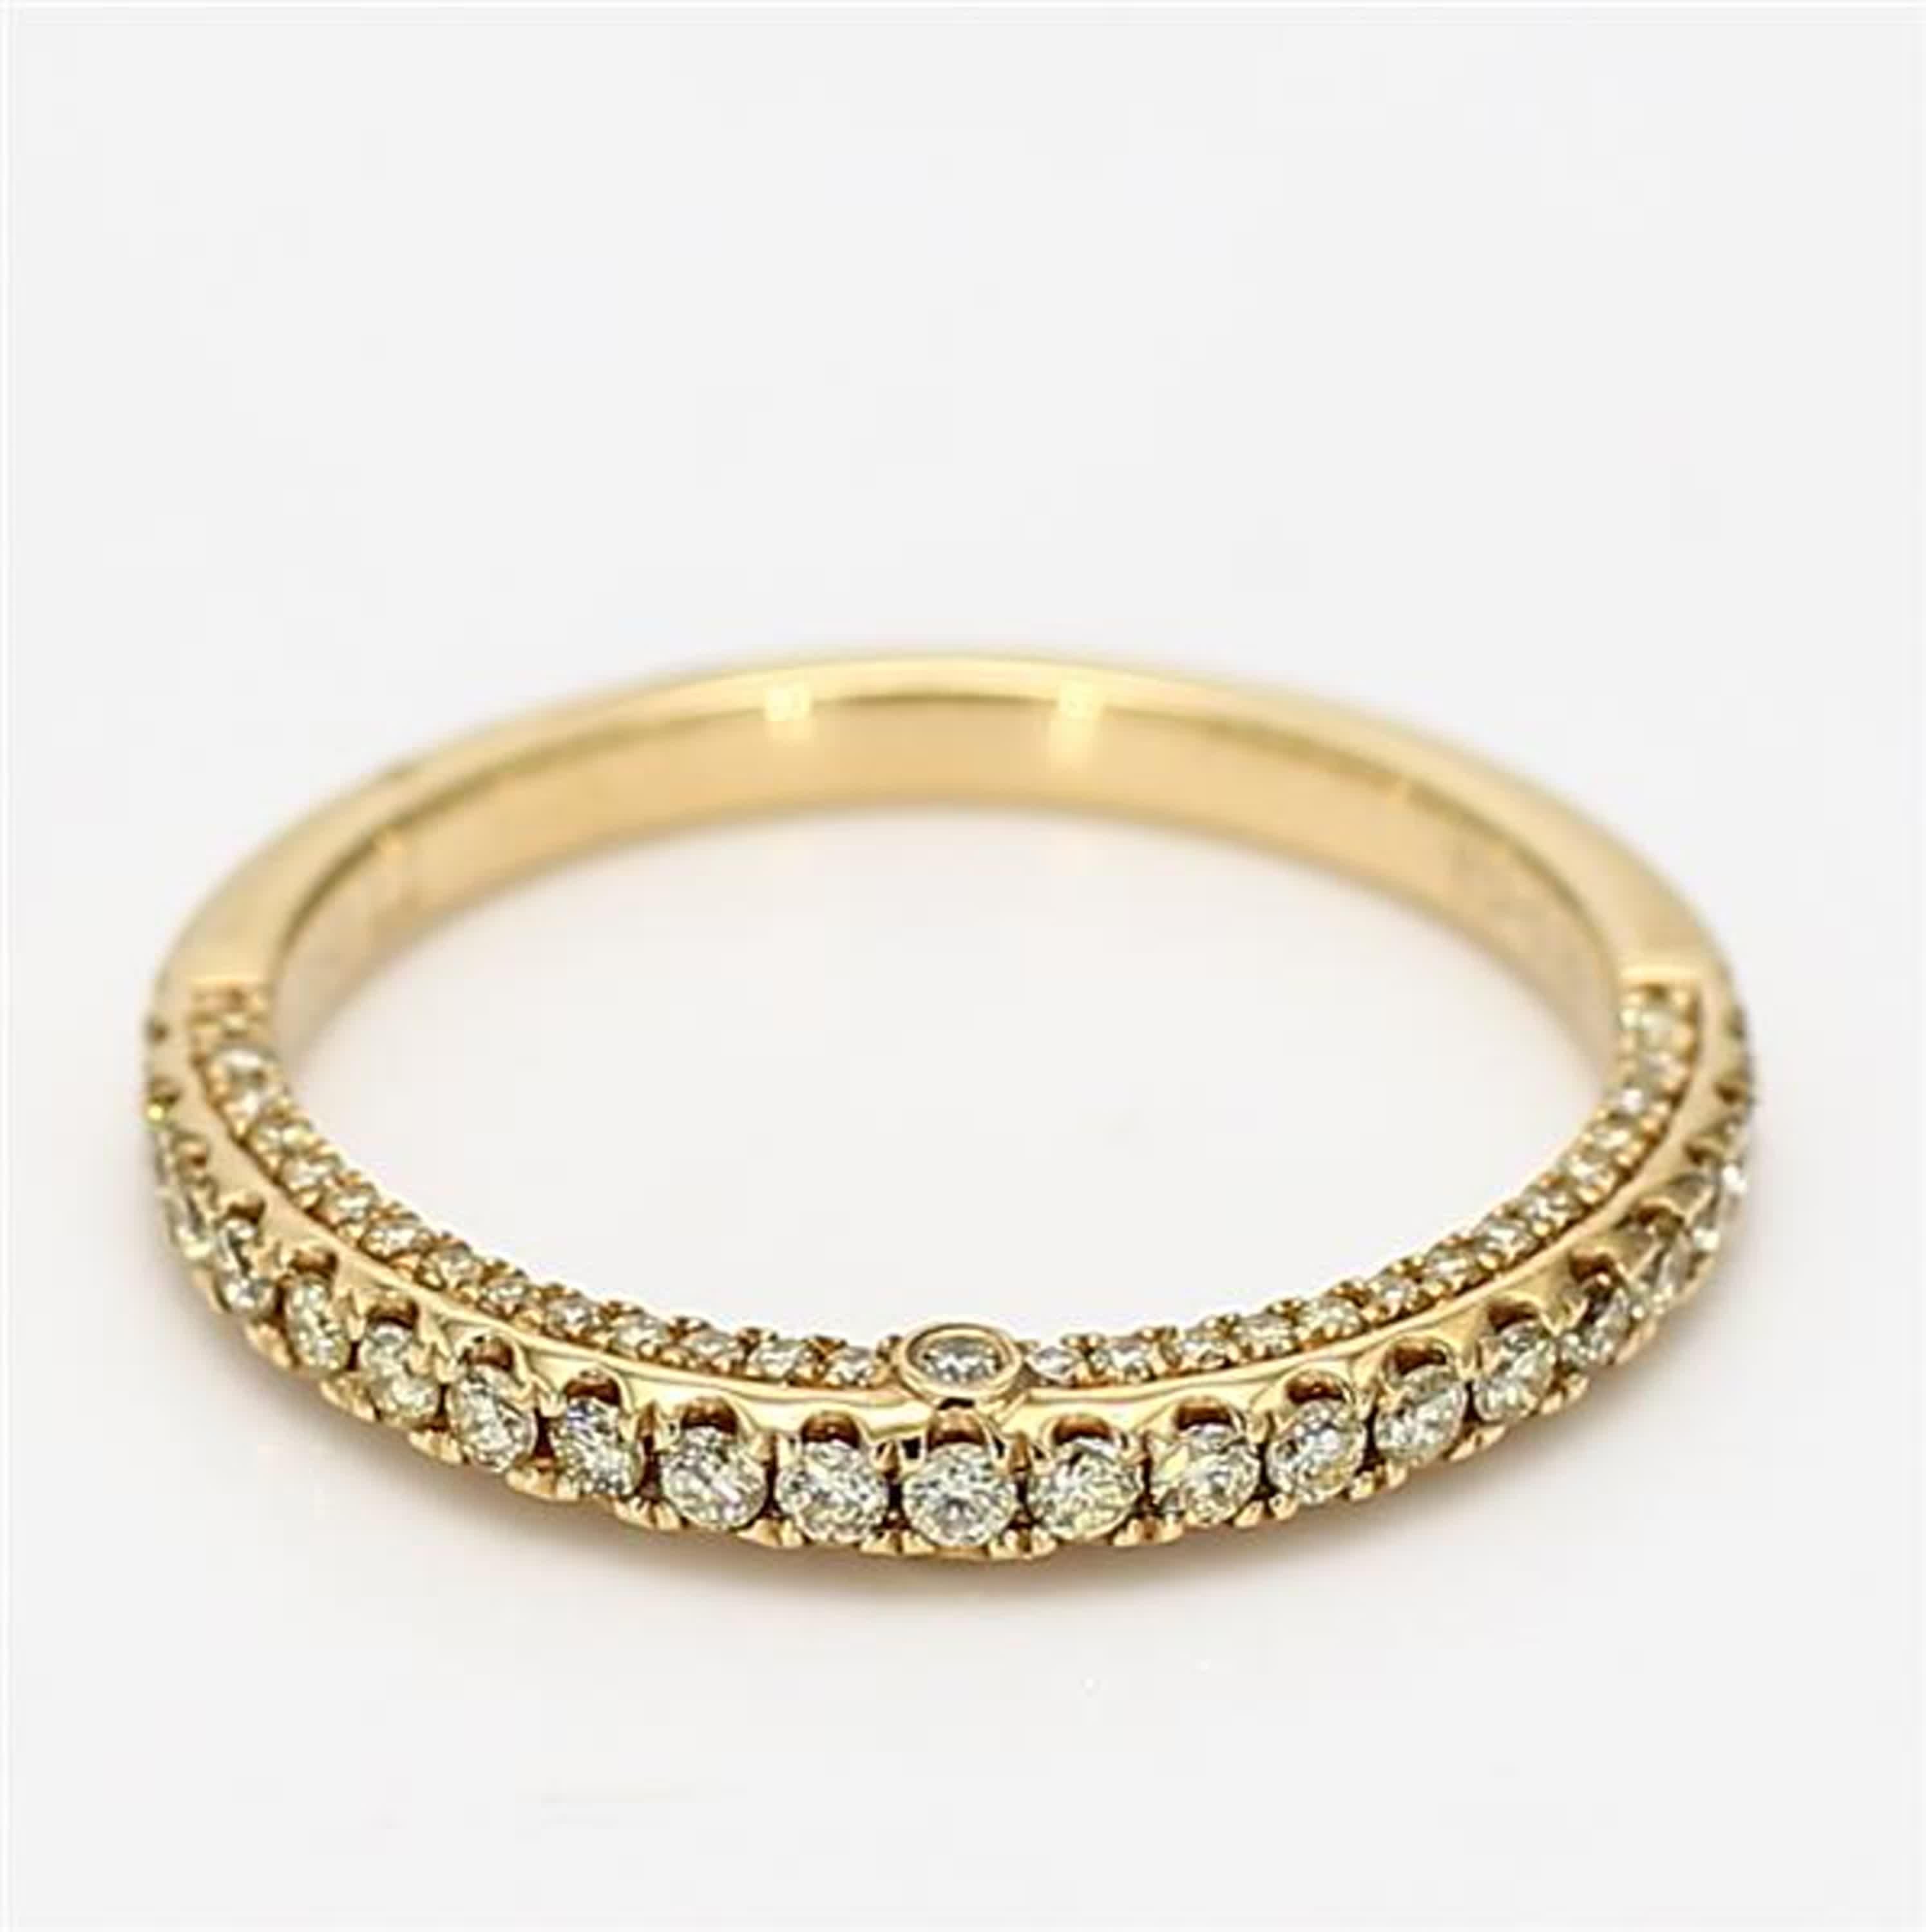 RareGemWorld's classic diamond band. Mounted in a beautiful 18K Yellow Gold setting with natural round yellow diamond melee. This band is guaranteed to impress and enhance your personal collection!

Total Weight: .39cts

Natural Round Yellow